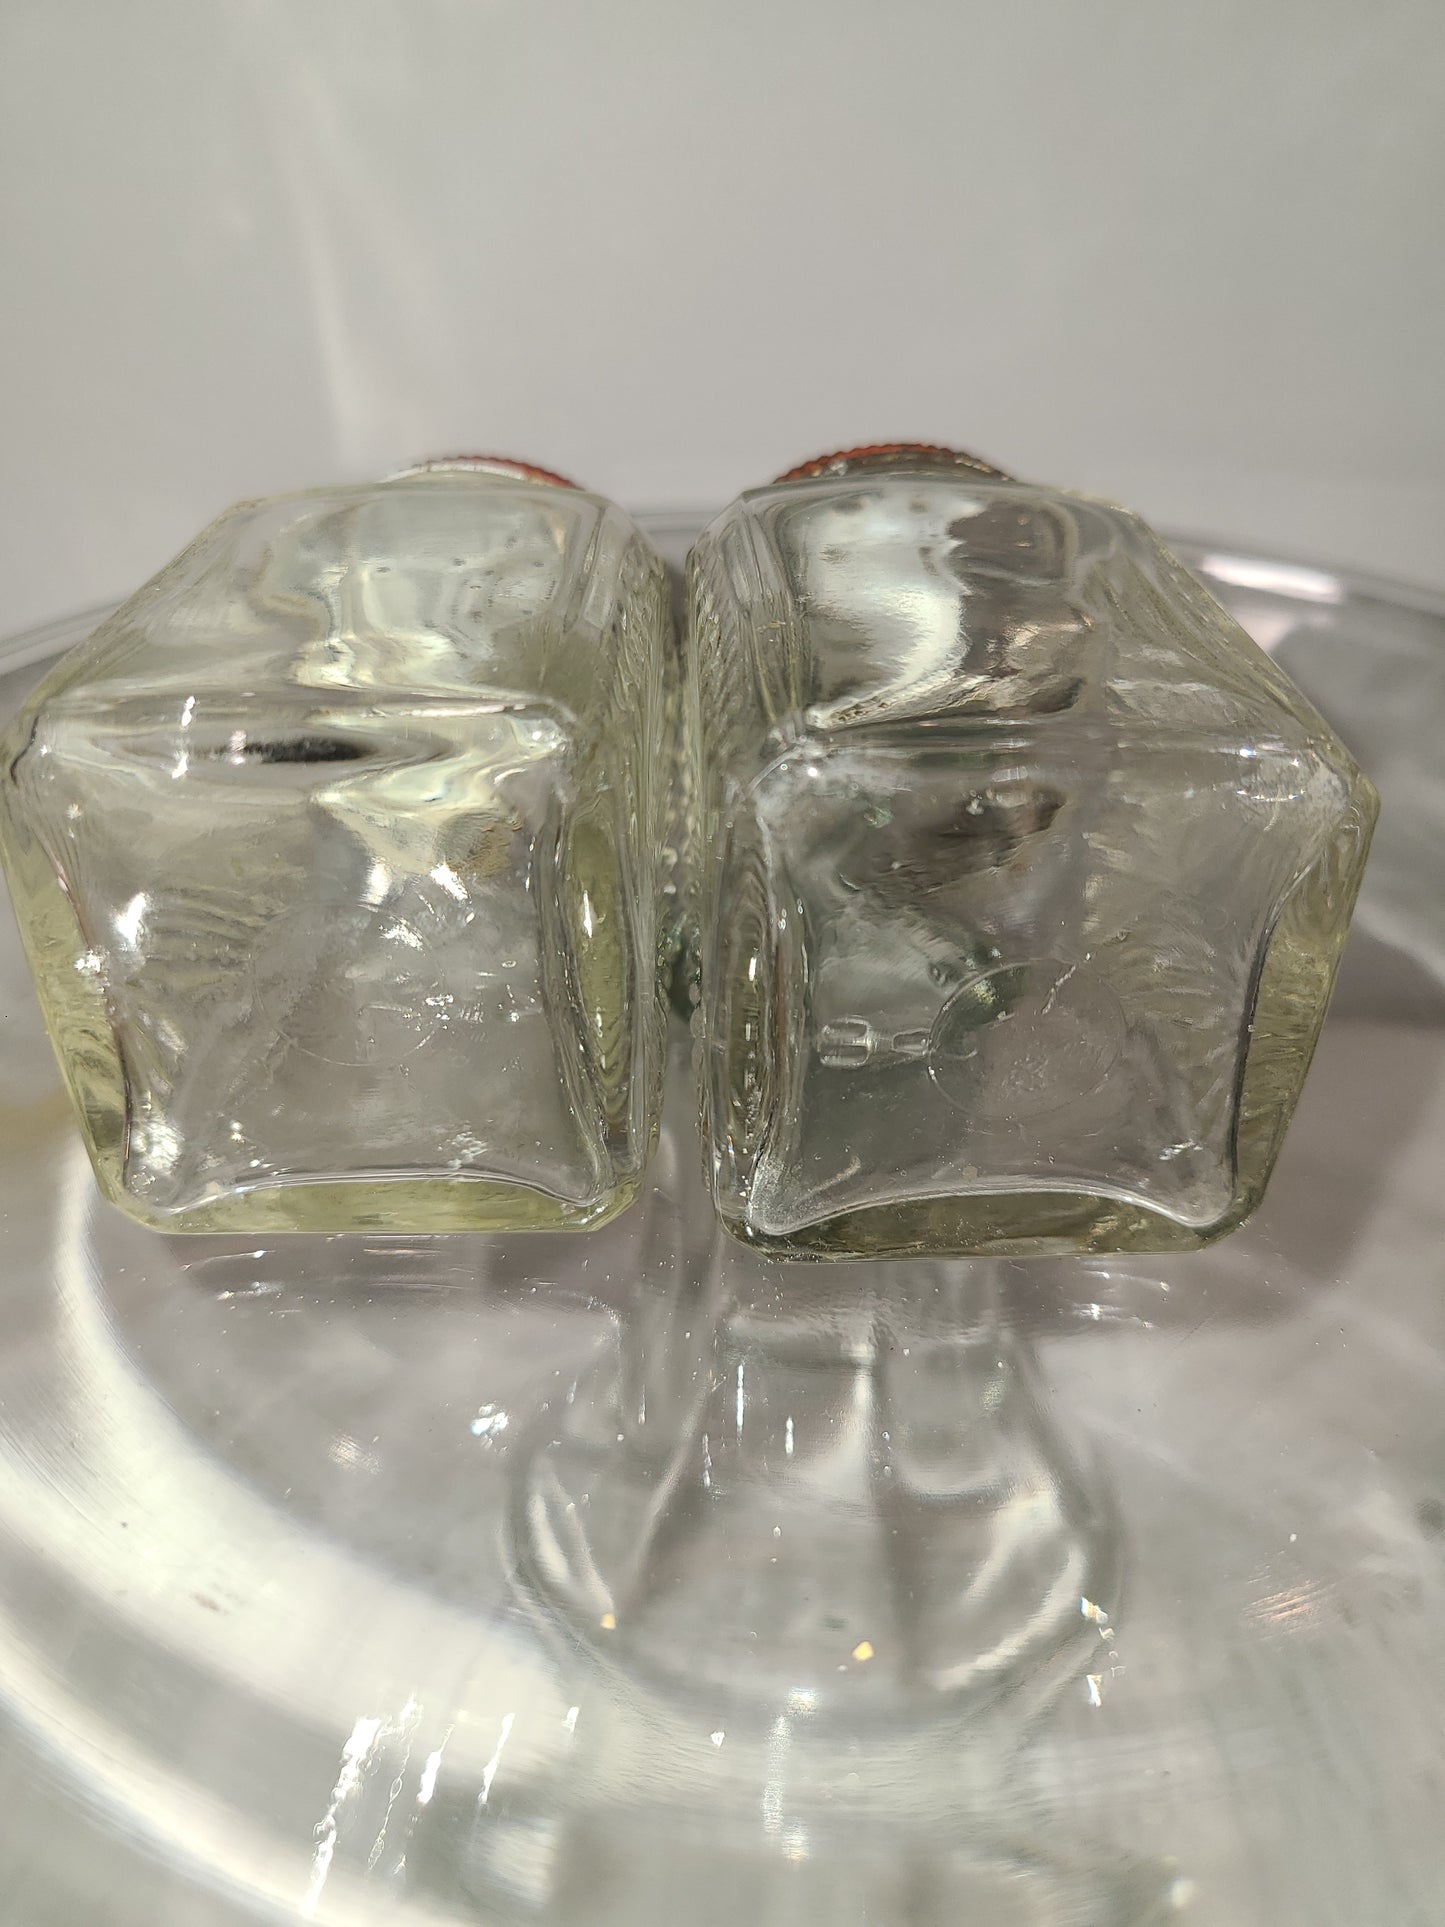 Vintage Glass Salt and Pepper Shakers with red lid